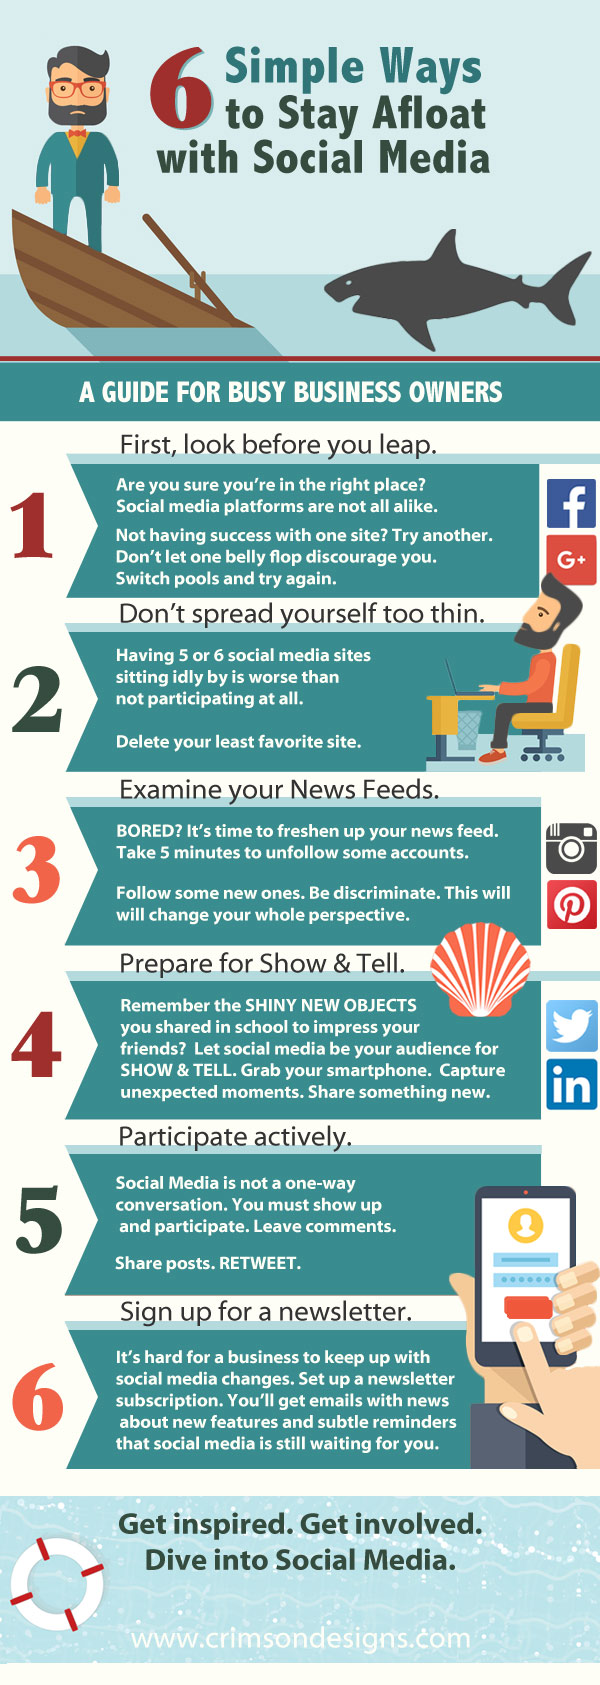 6 Simple Ways to Stay Afloat with Social Media - Infographic